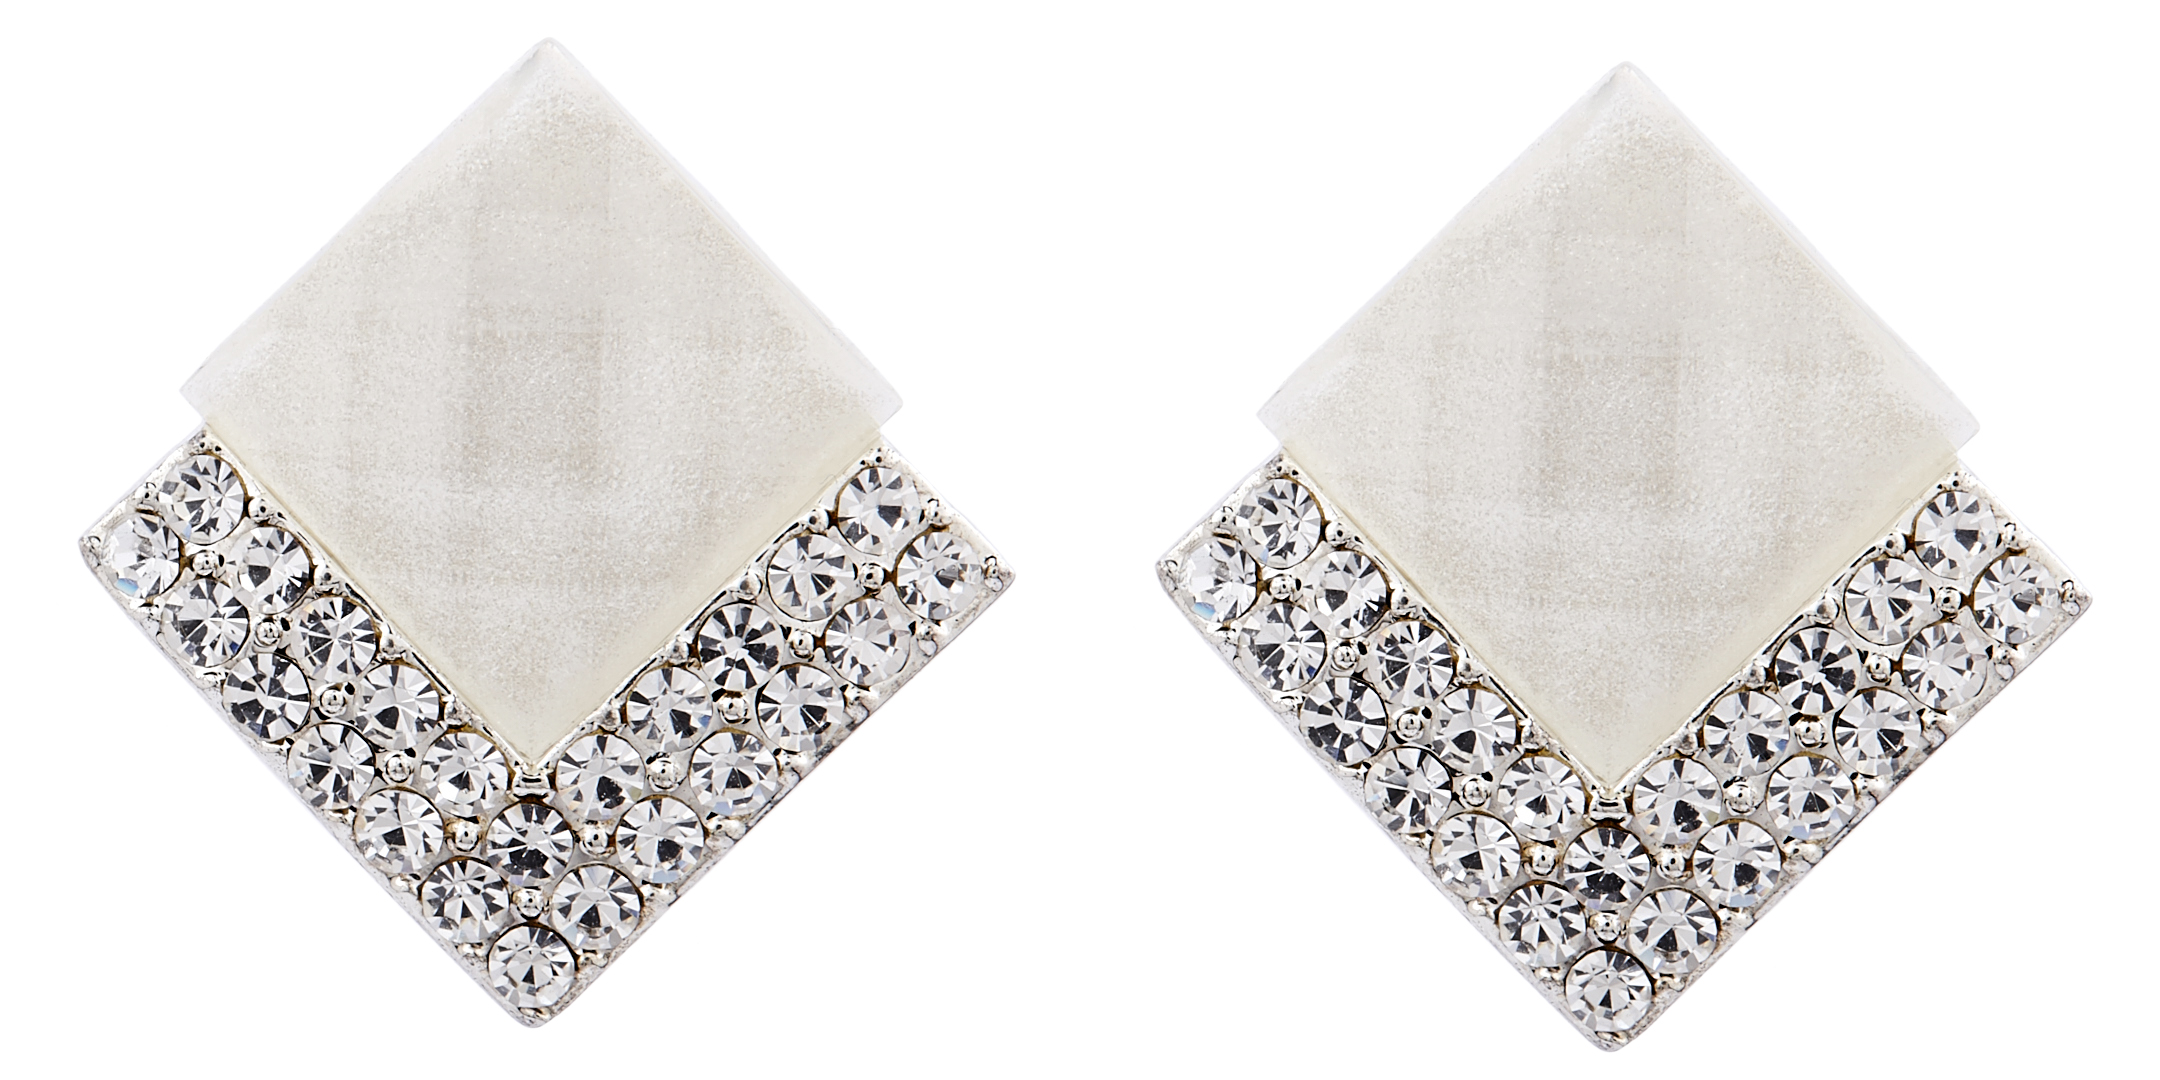 Clip On Earrings - Bess W - silver stud earring with a white stone and crystals